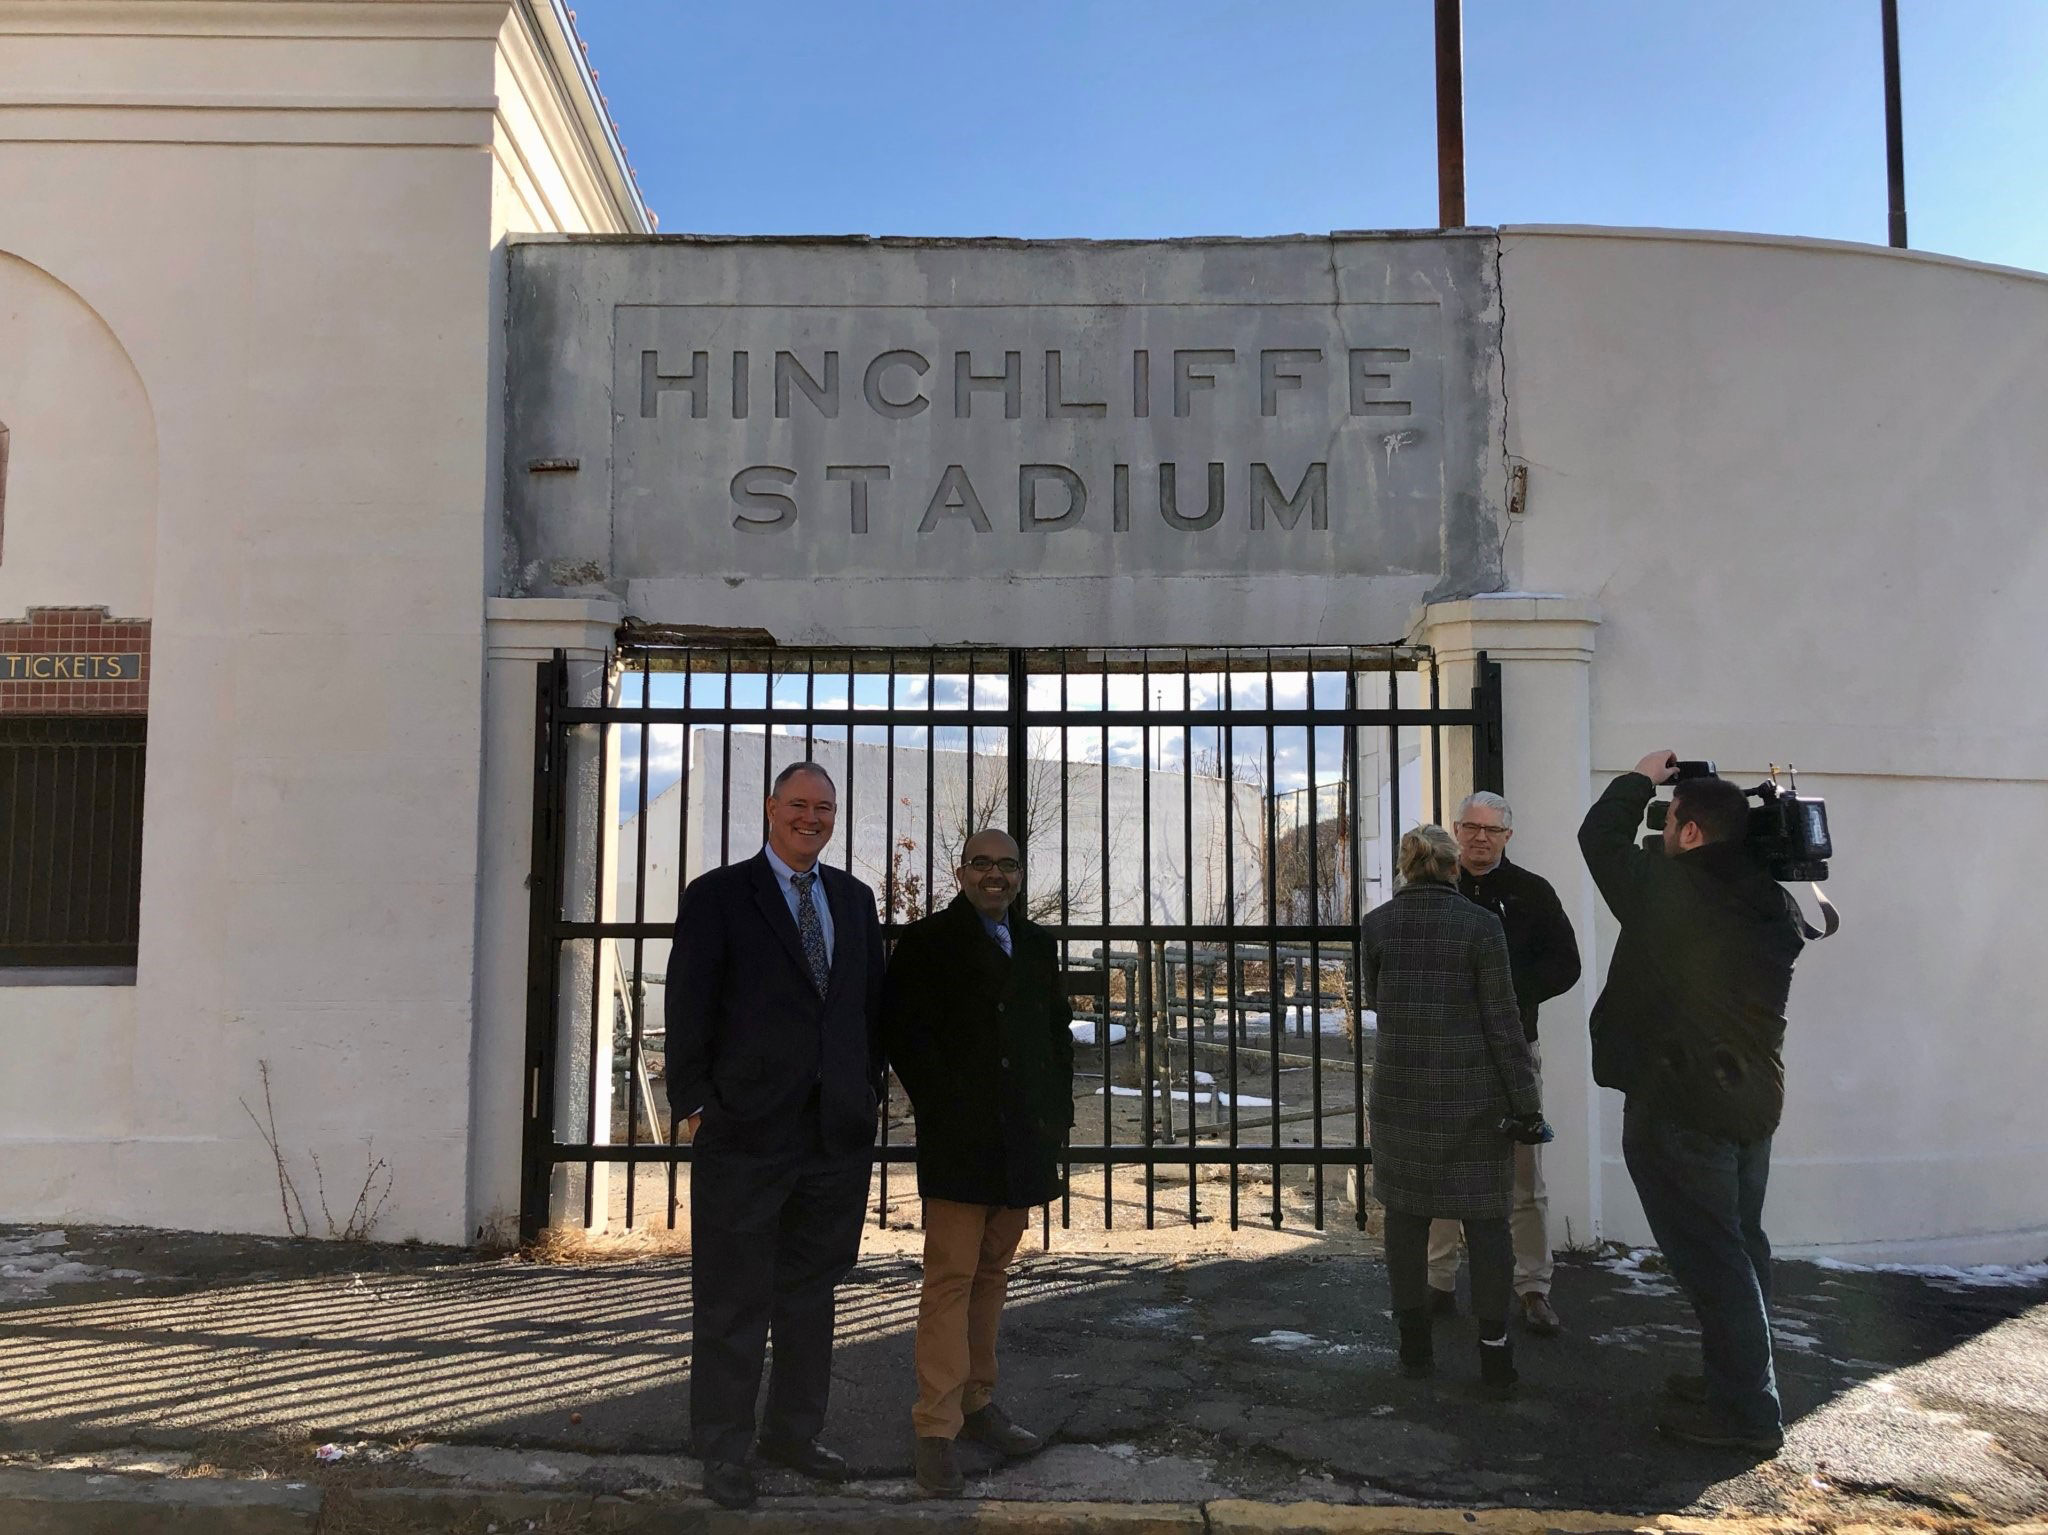 Frank McLaughlin, Manager of CCI (left), and AJ Joshi, CCI Liaison to Paterson (right) in front of Hinchliffe Stadium. [Julia Wong, NJDEP Office of Brownfield & Community Revitalization, December 5, 2019.]